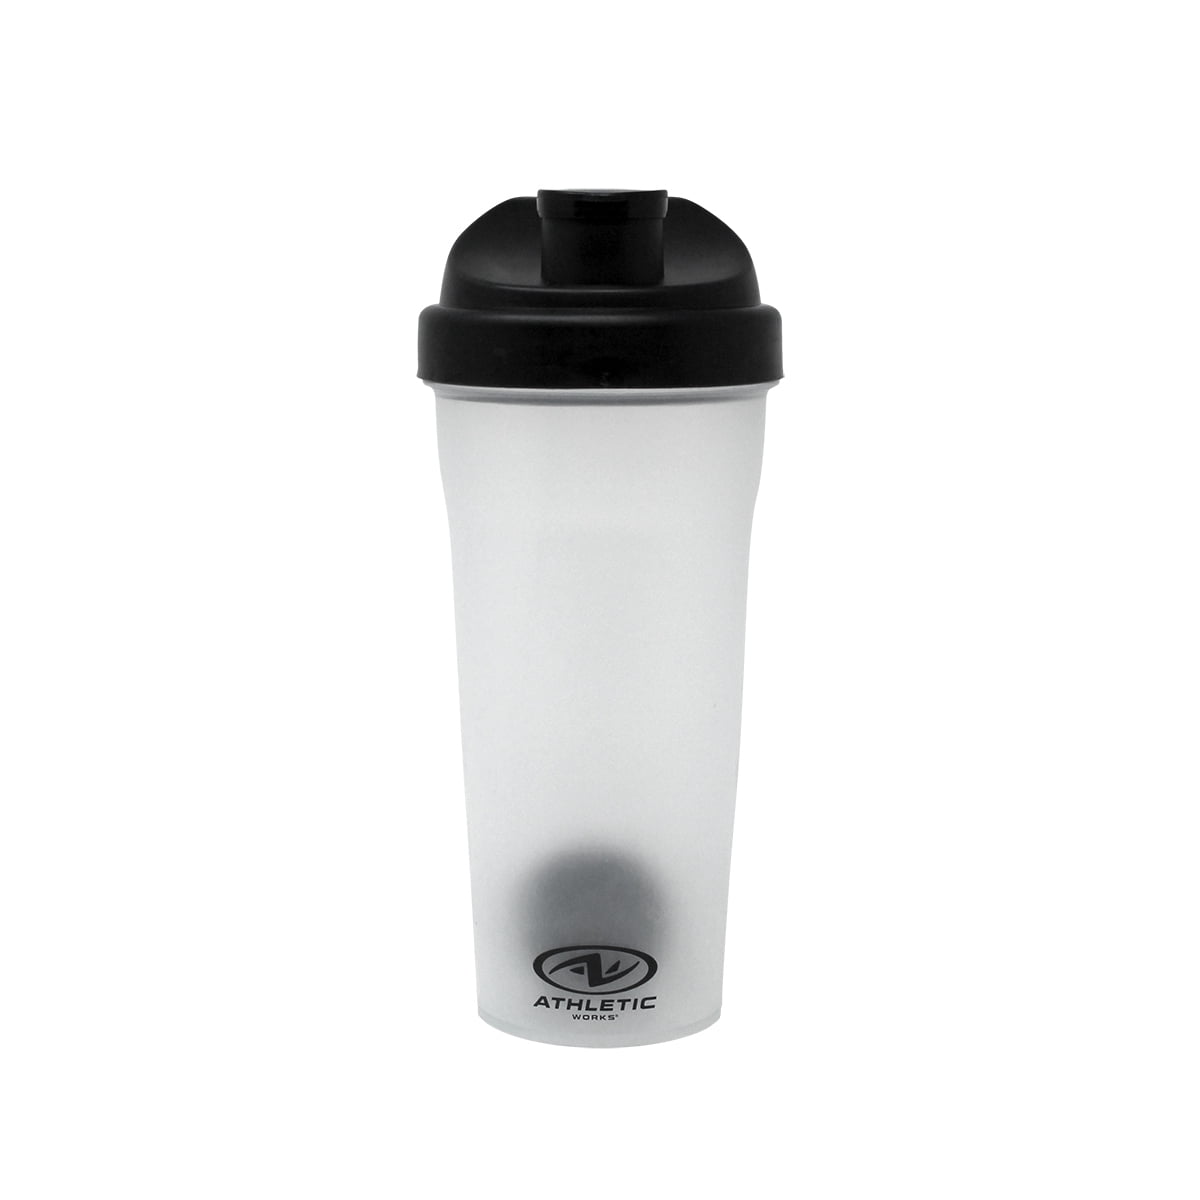 Wave Shaker Bottle 20oz | No Blender Ball Needed | Great For Pre Workout,  Protein Shakes, and Cocktails | BPA Free | Rope Handle